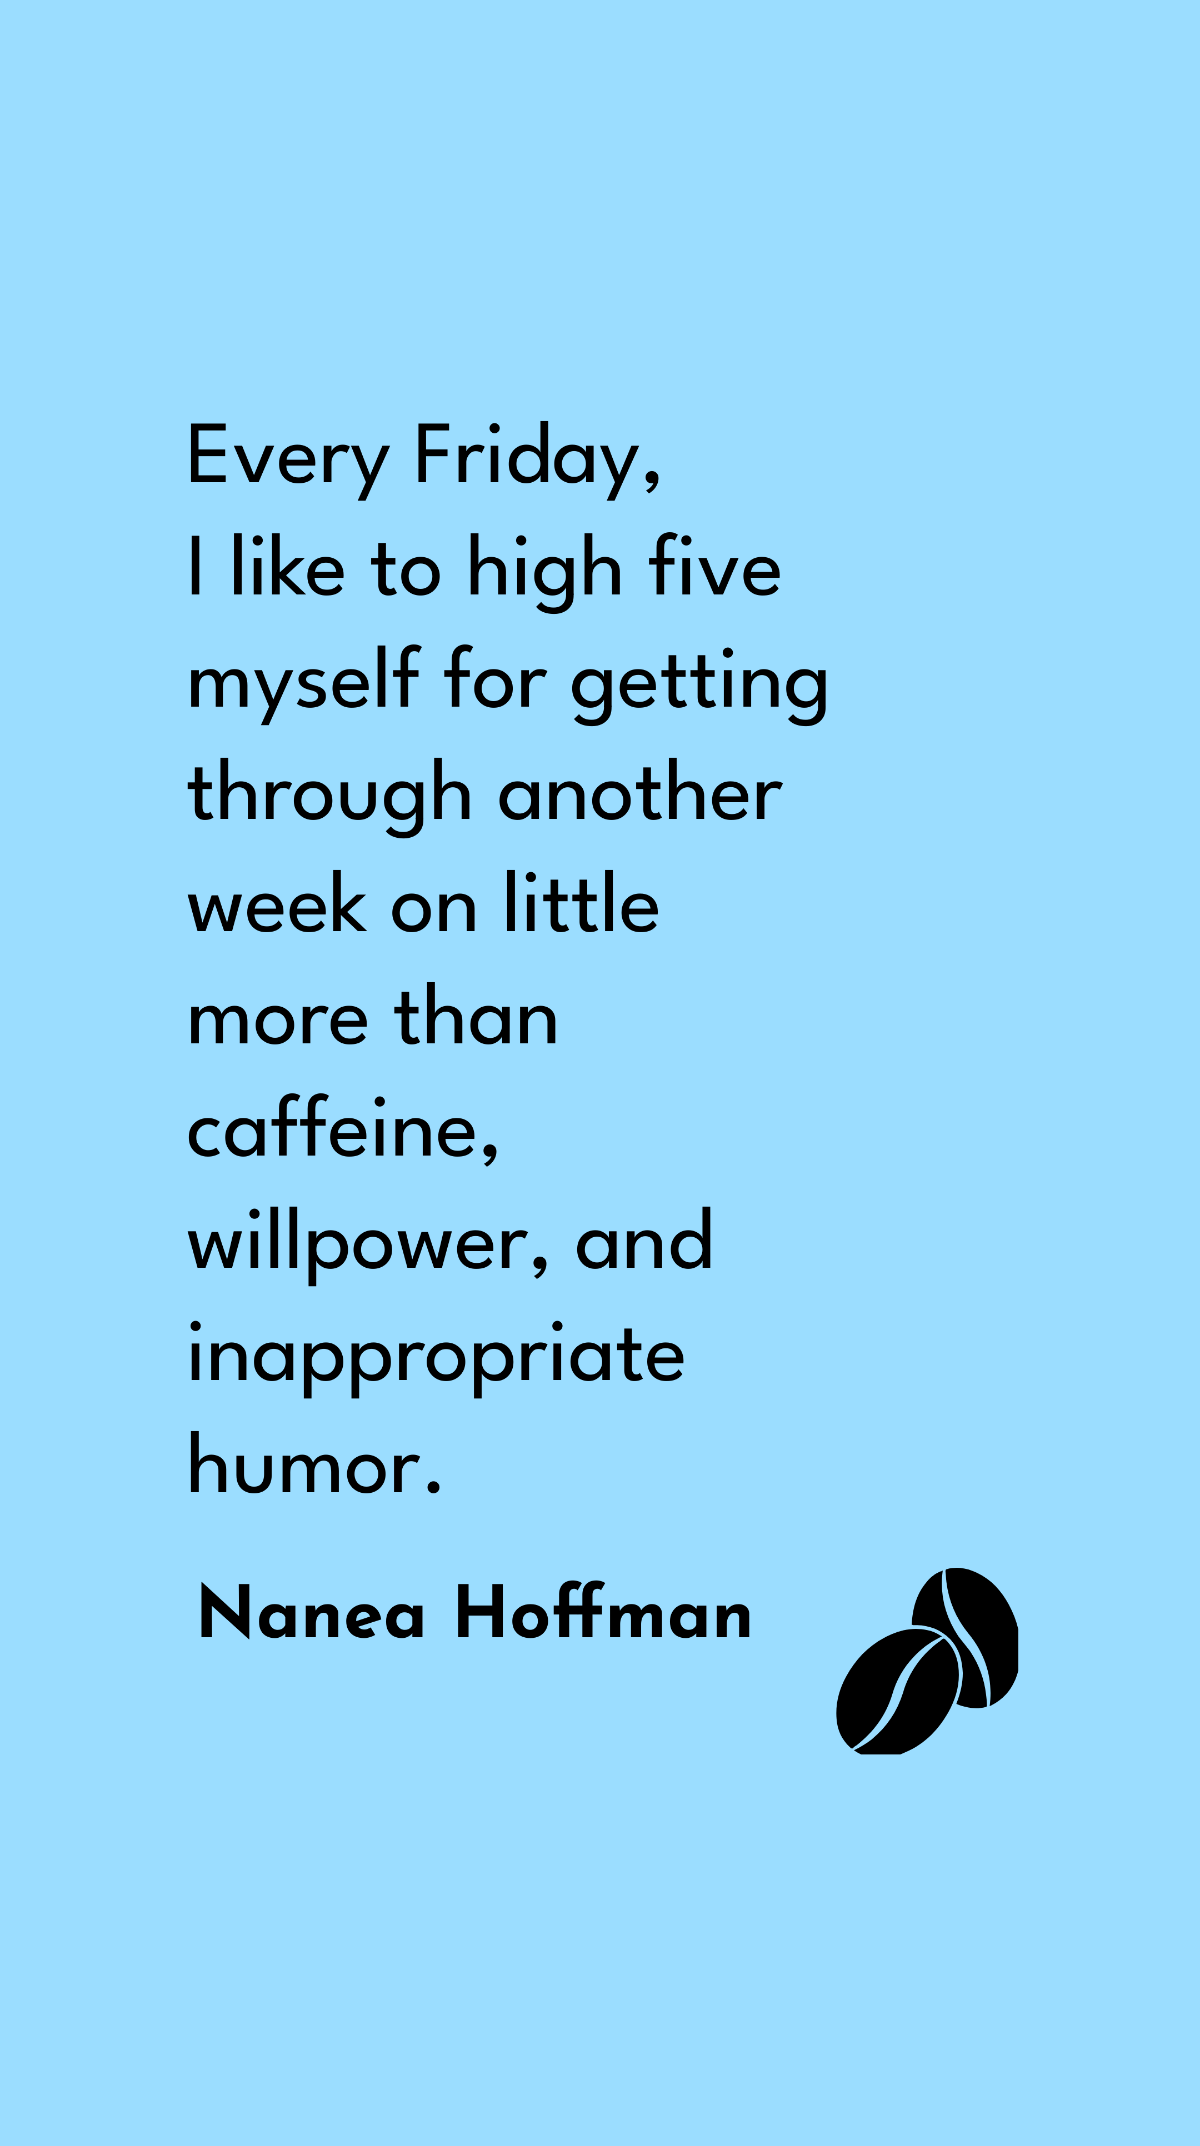 Nanea Hoffman - Every Friday, I like to high five myself for getting through another week on little more than caffeine, willpower, and inappropriate humor.